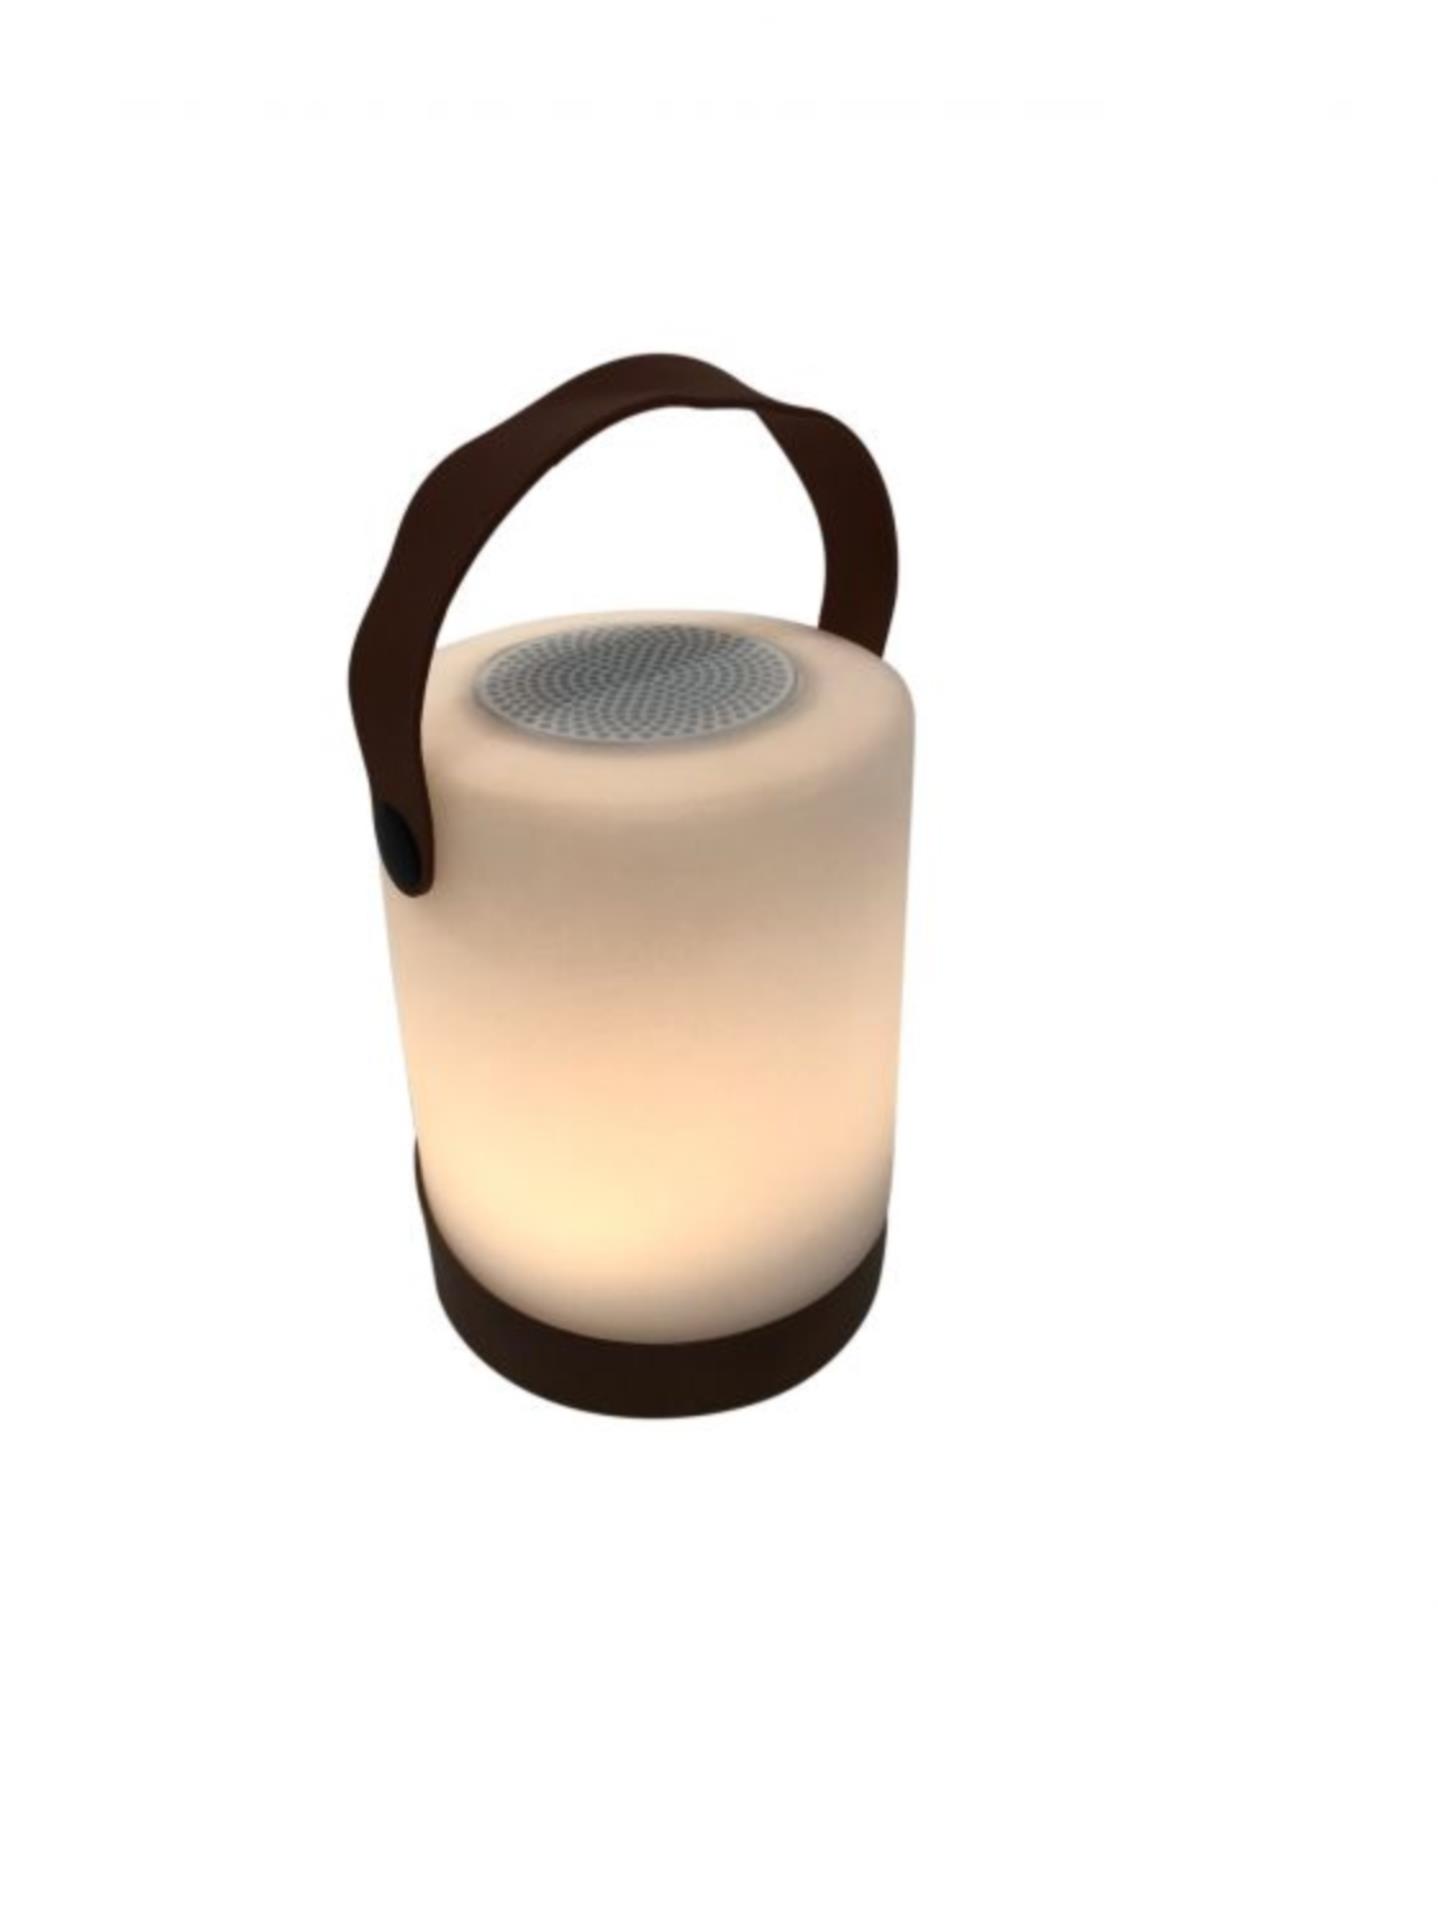 ARC Marine Cosy Lampe Mably Plus wood